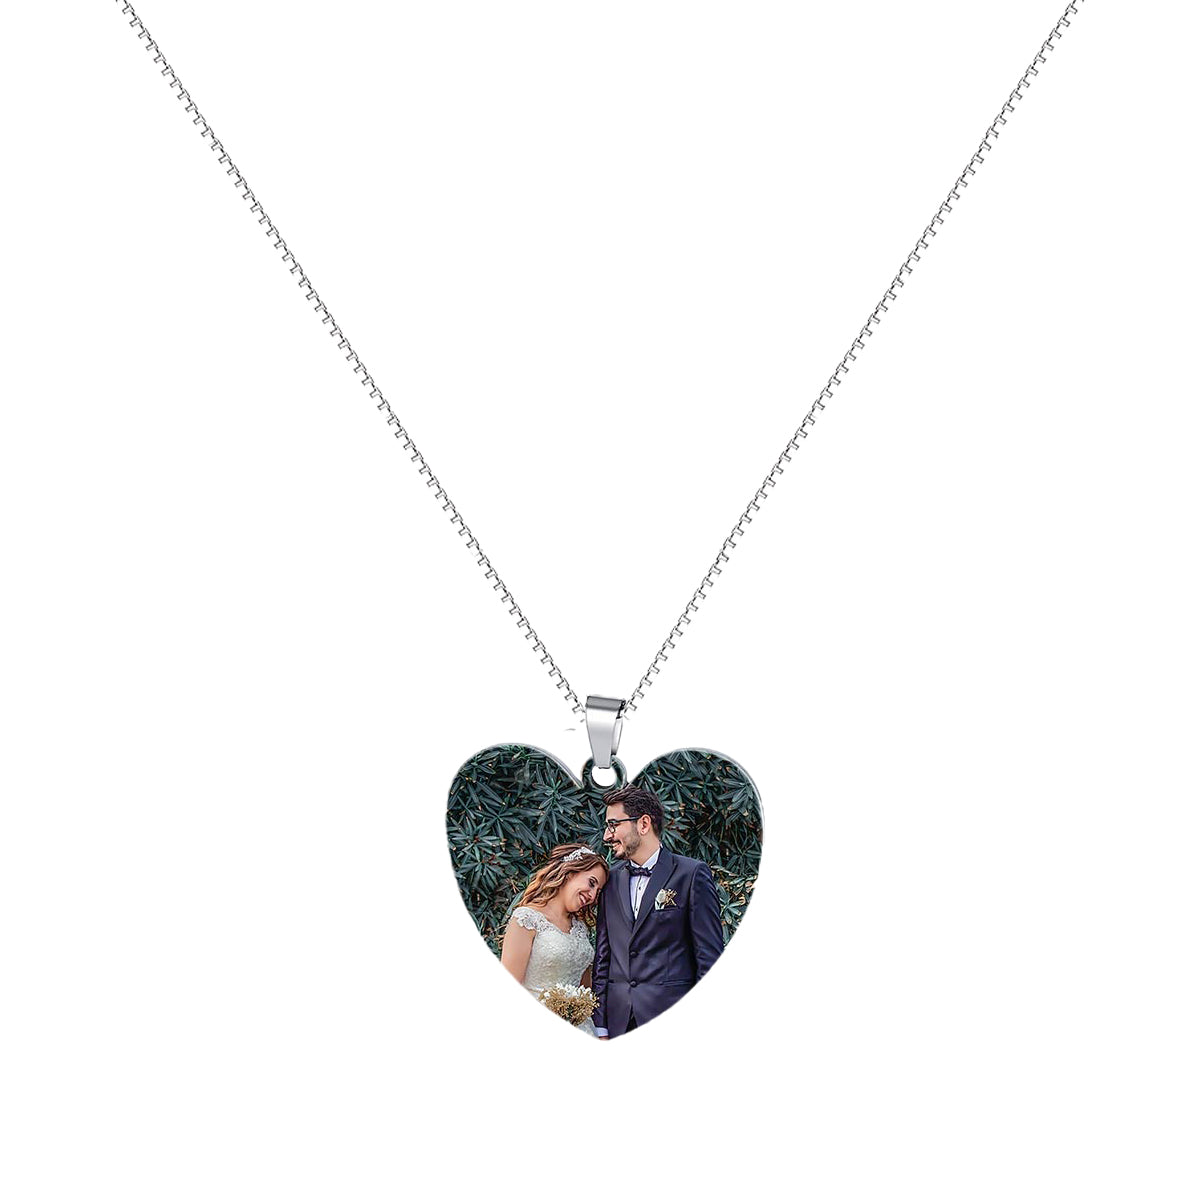 Heart Personalized Necklaces with Pictures